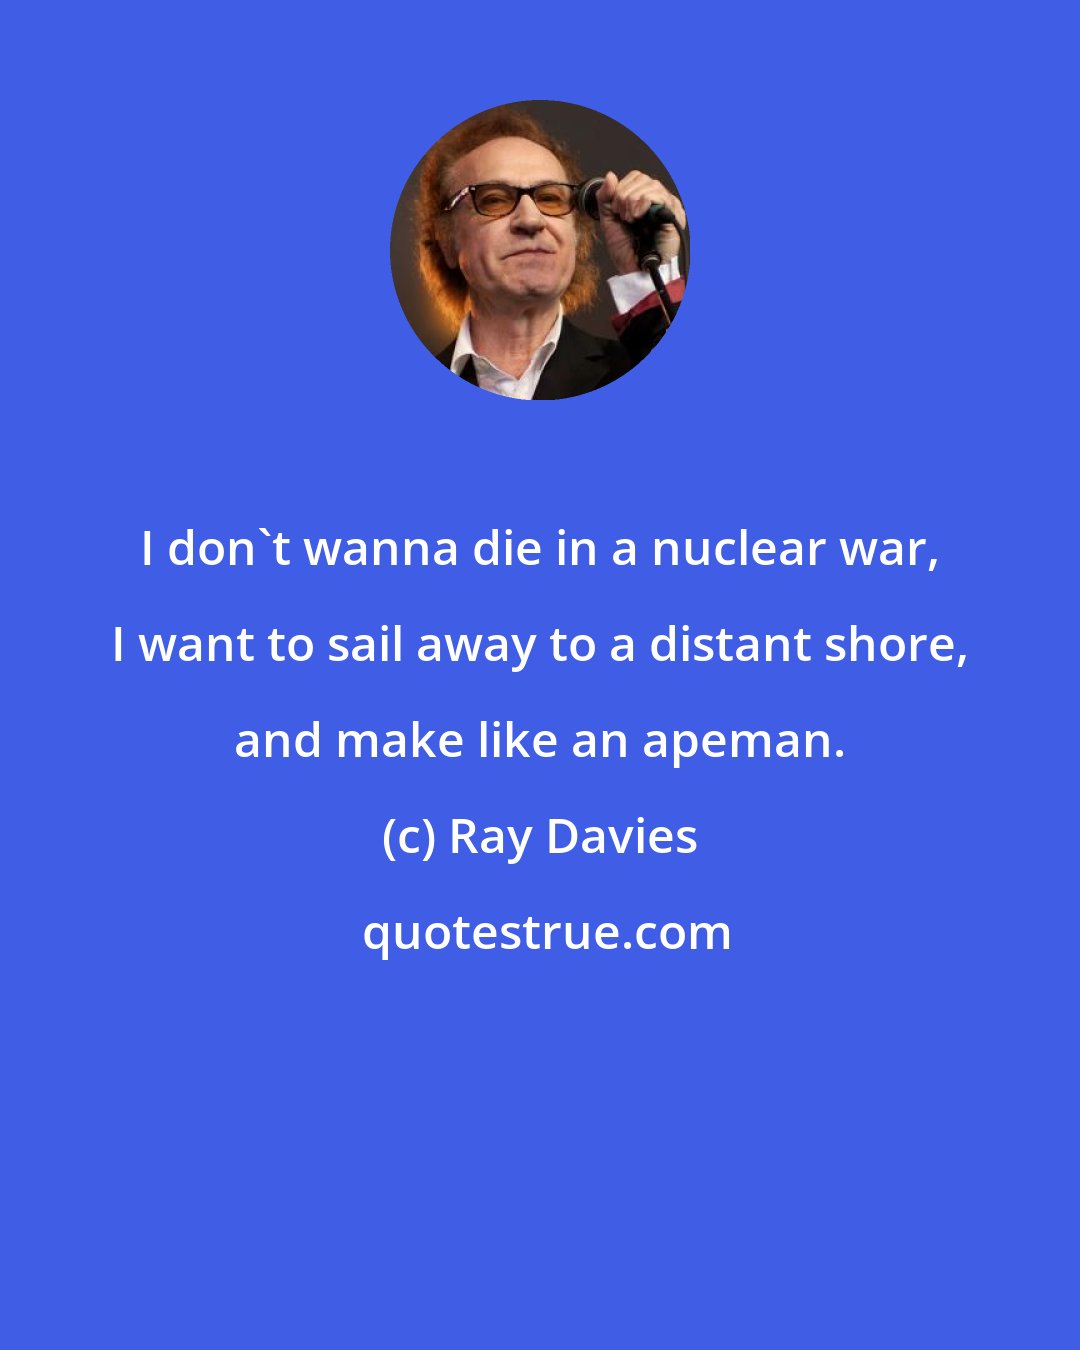 Ray Davies: I don't wanna die in a nuclear war, I want to sail away to a distant shore, and make like an apeman.